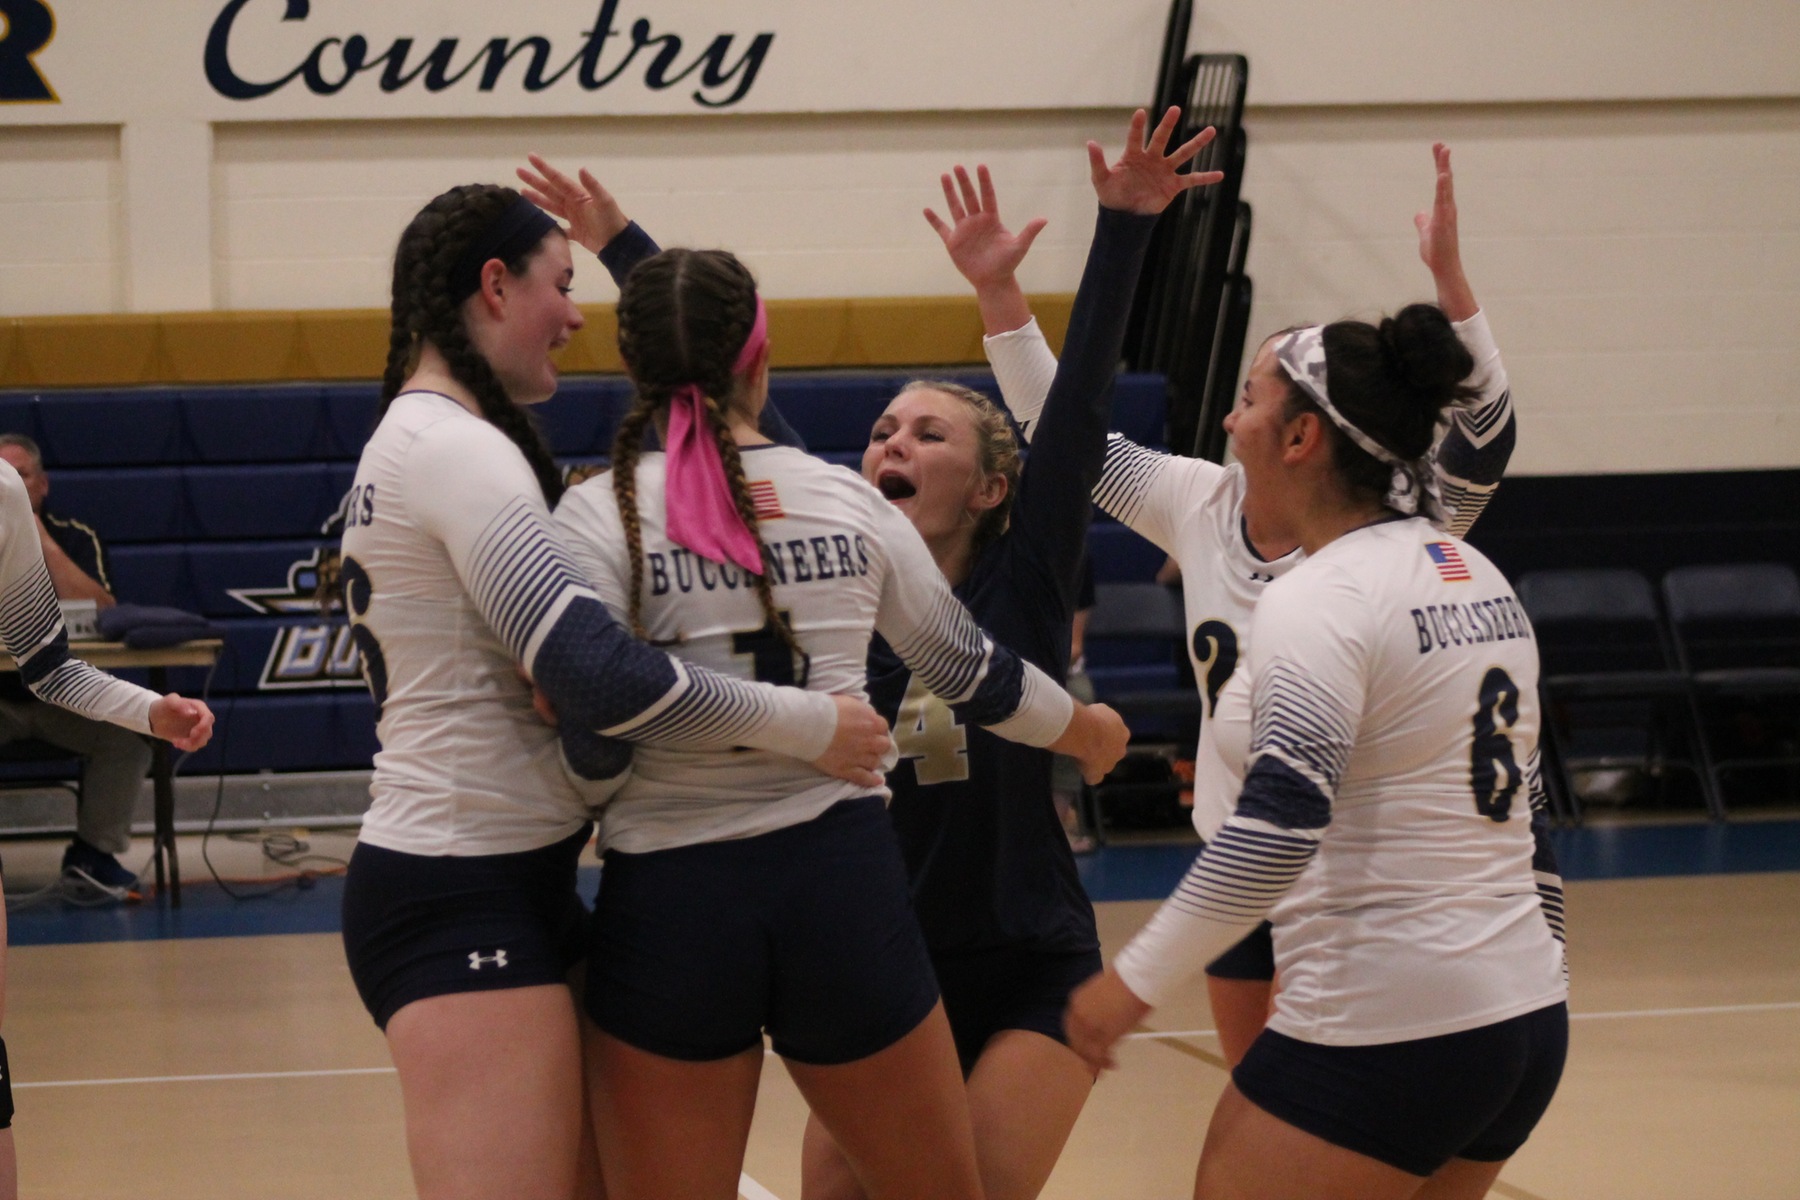 Bucs Come Back from Two Sets Down to Get First Win in Five Sets